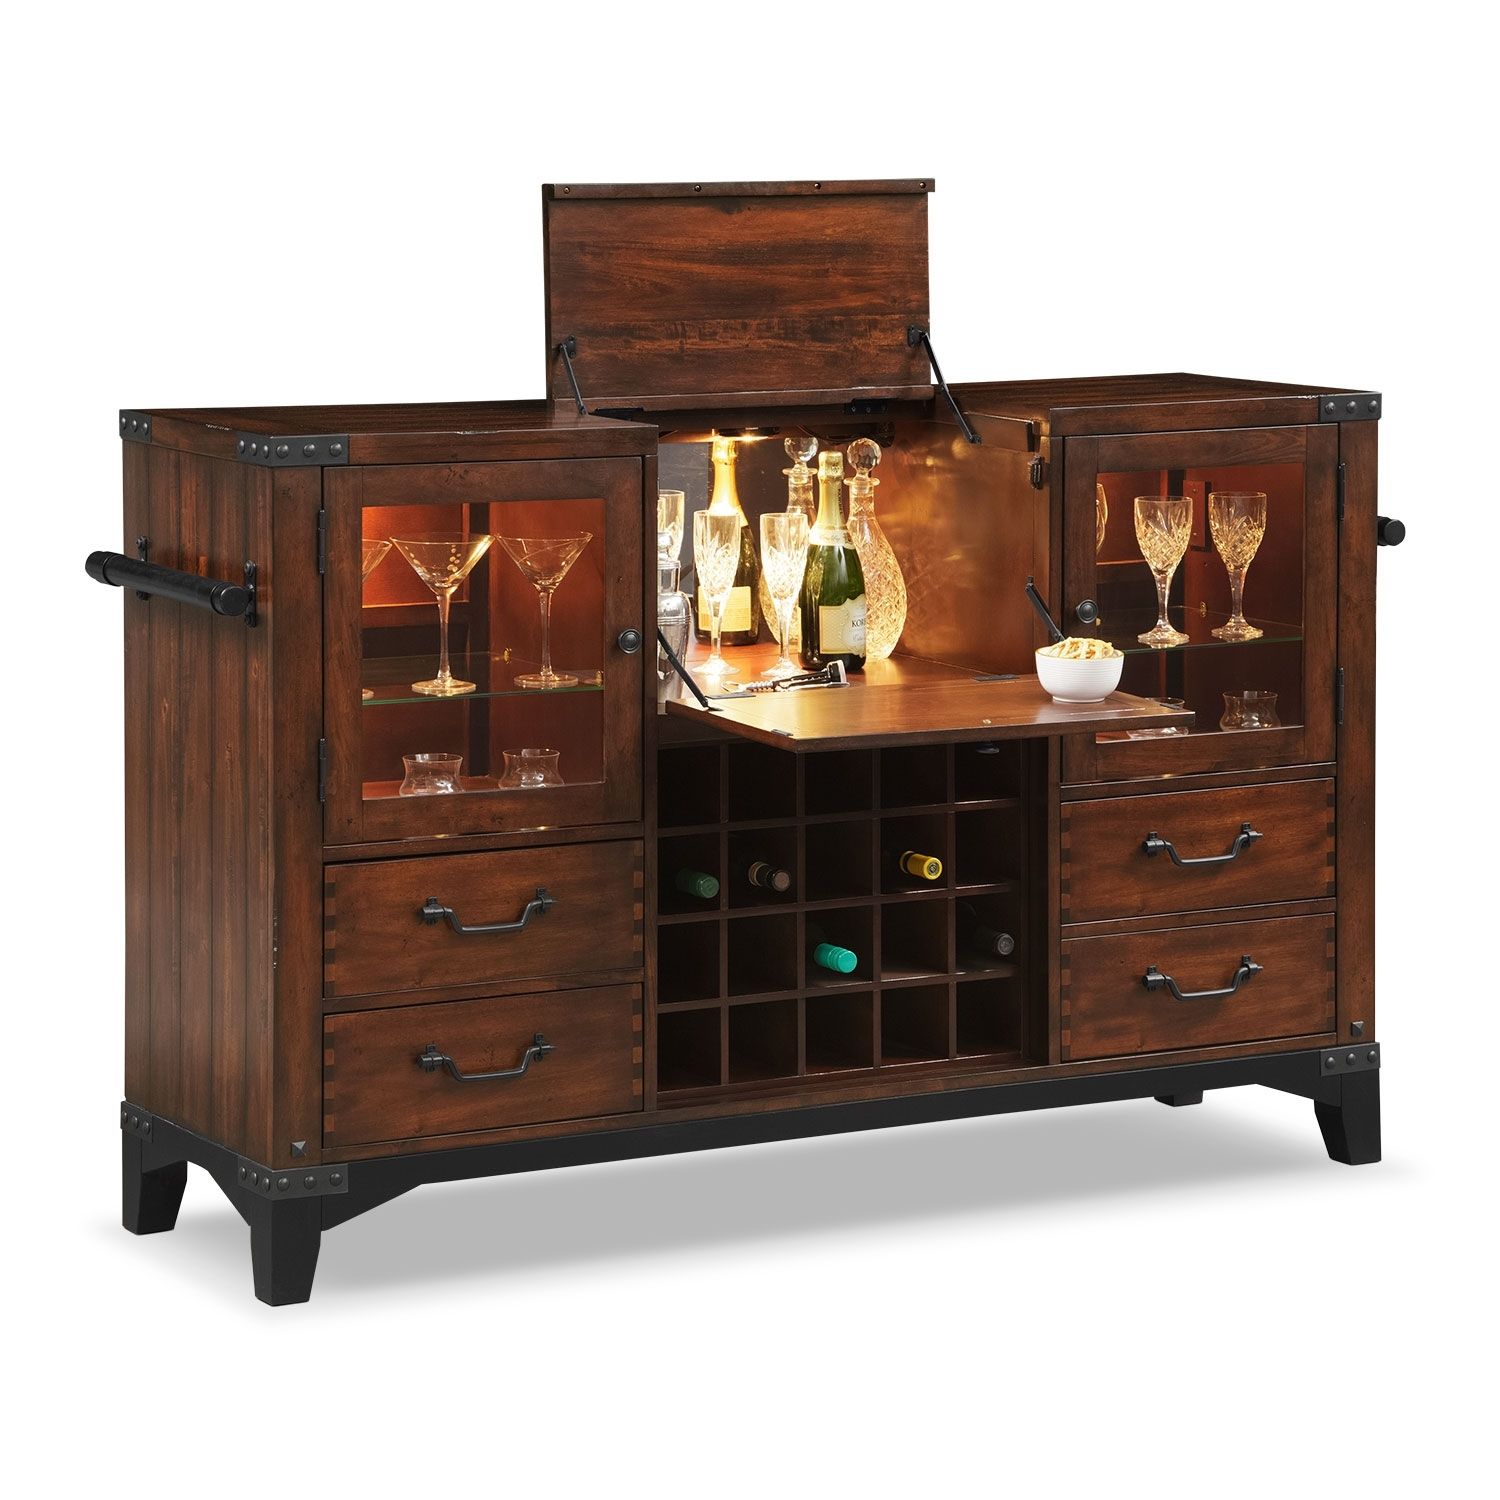 Buffet & Sideboard Cabinets | Value City Furniture And Mattresses Pertaining To Latest Vintage 8 Glass Sideboards (View 3 of 20)